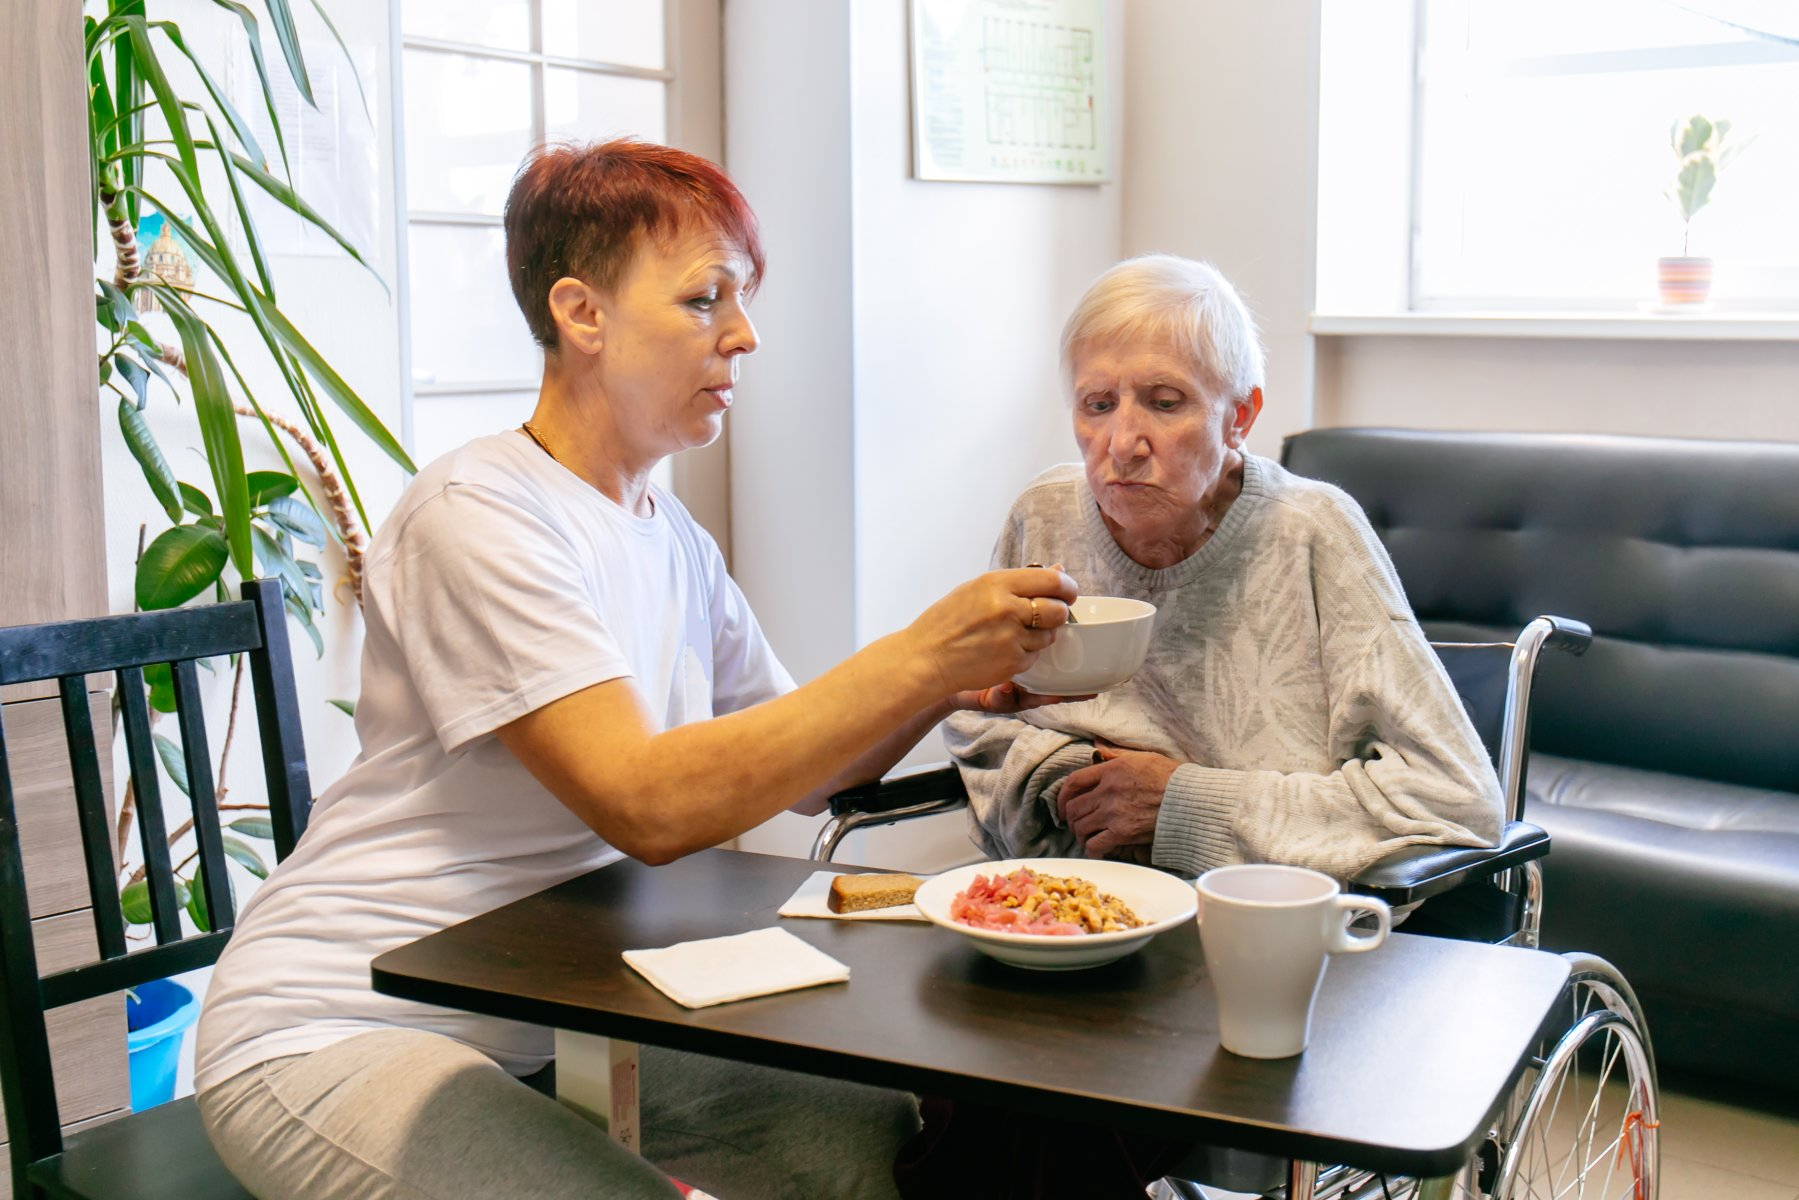 Nutrition Support in Palliative Care: Meeting the Unique Needs of End-of-Life Patients